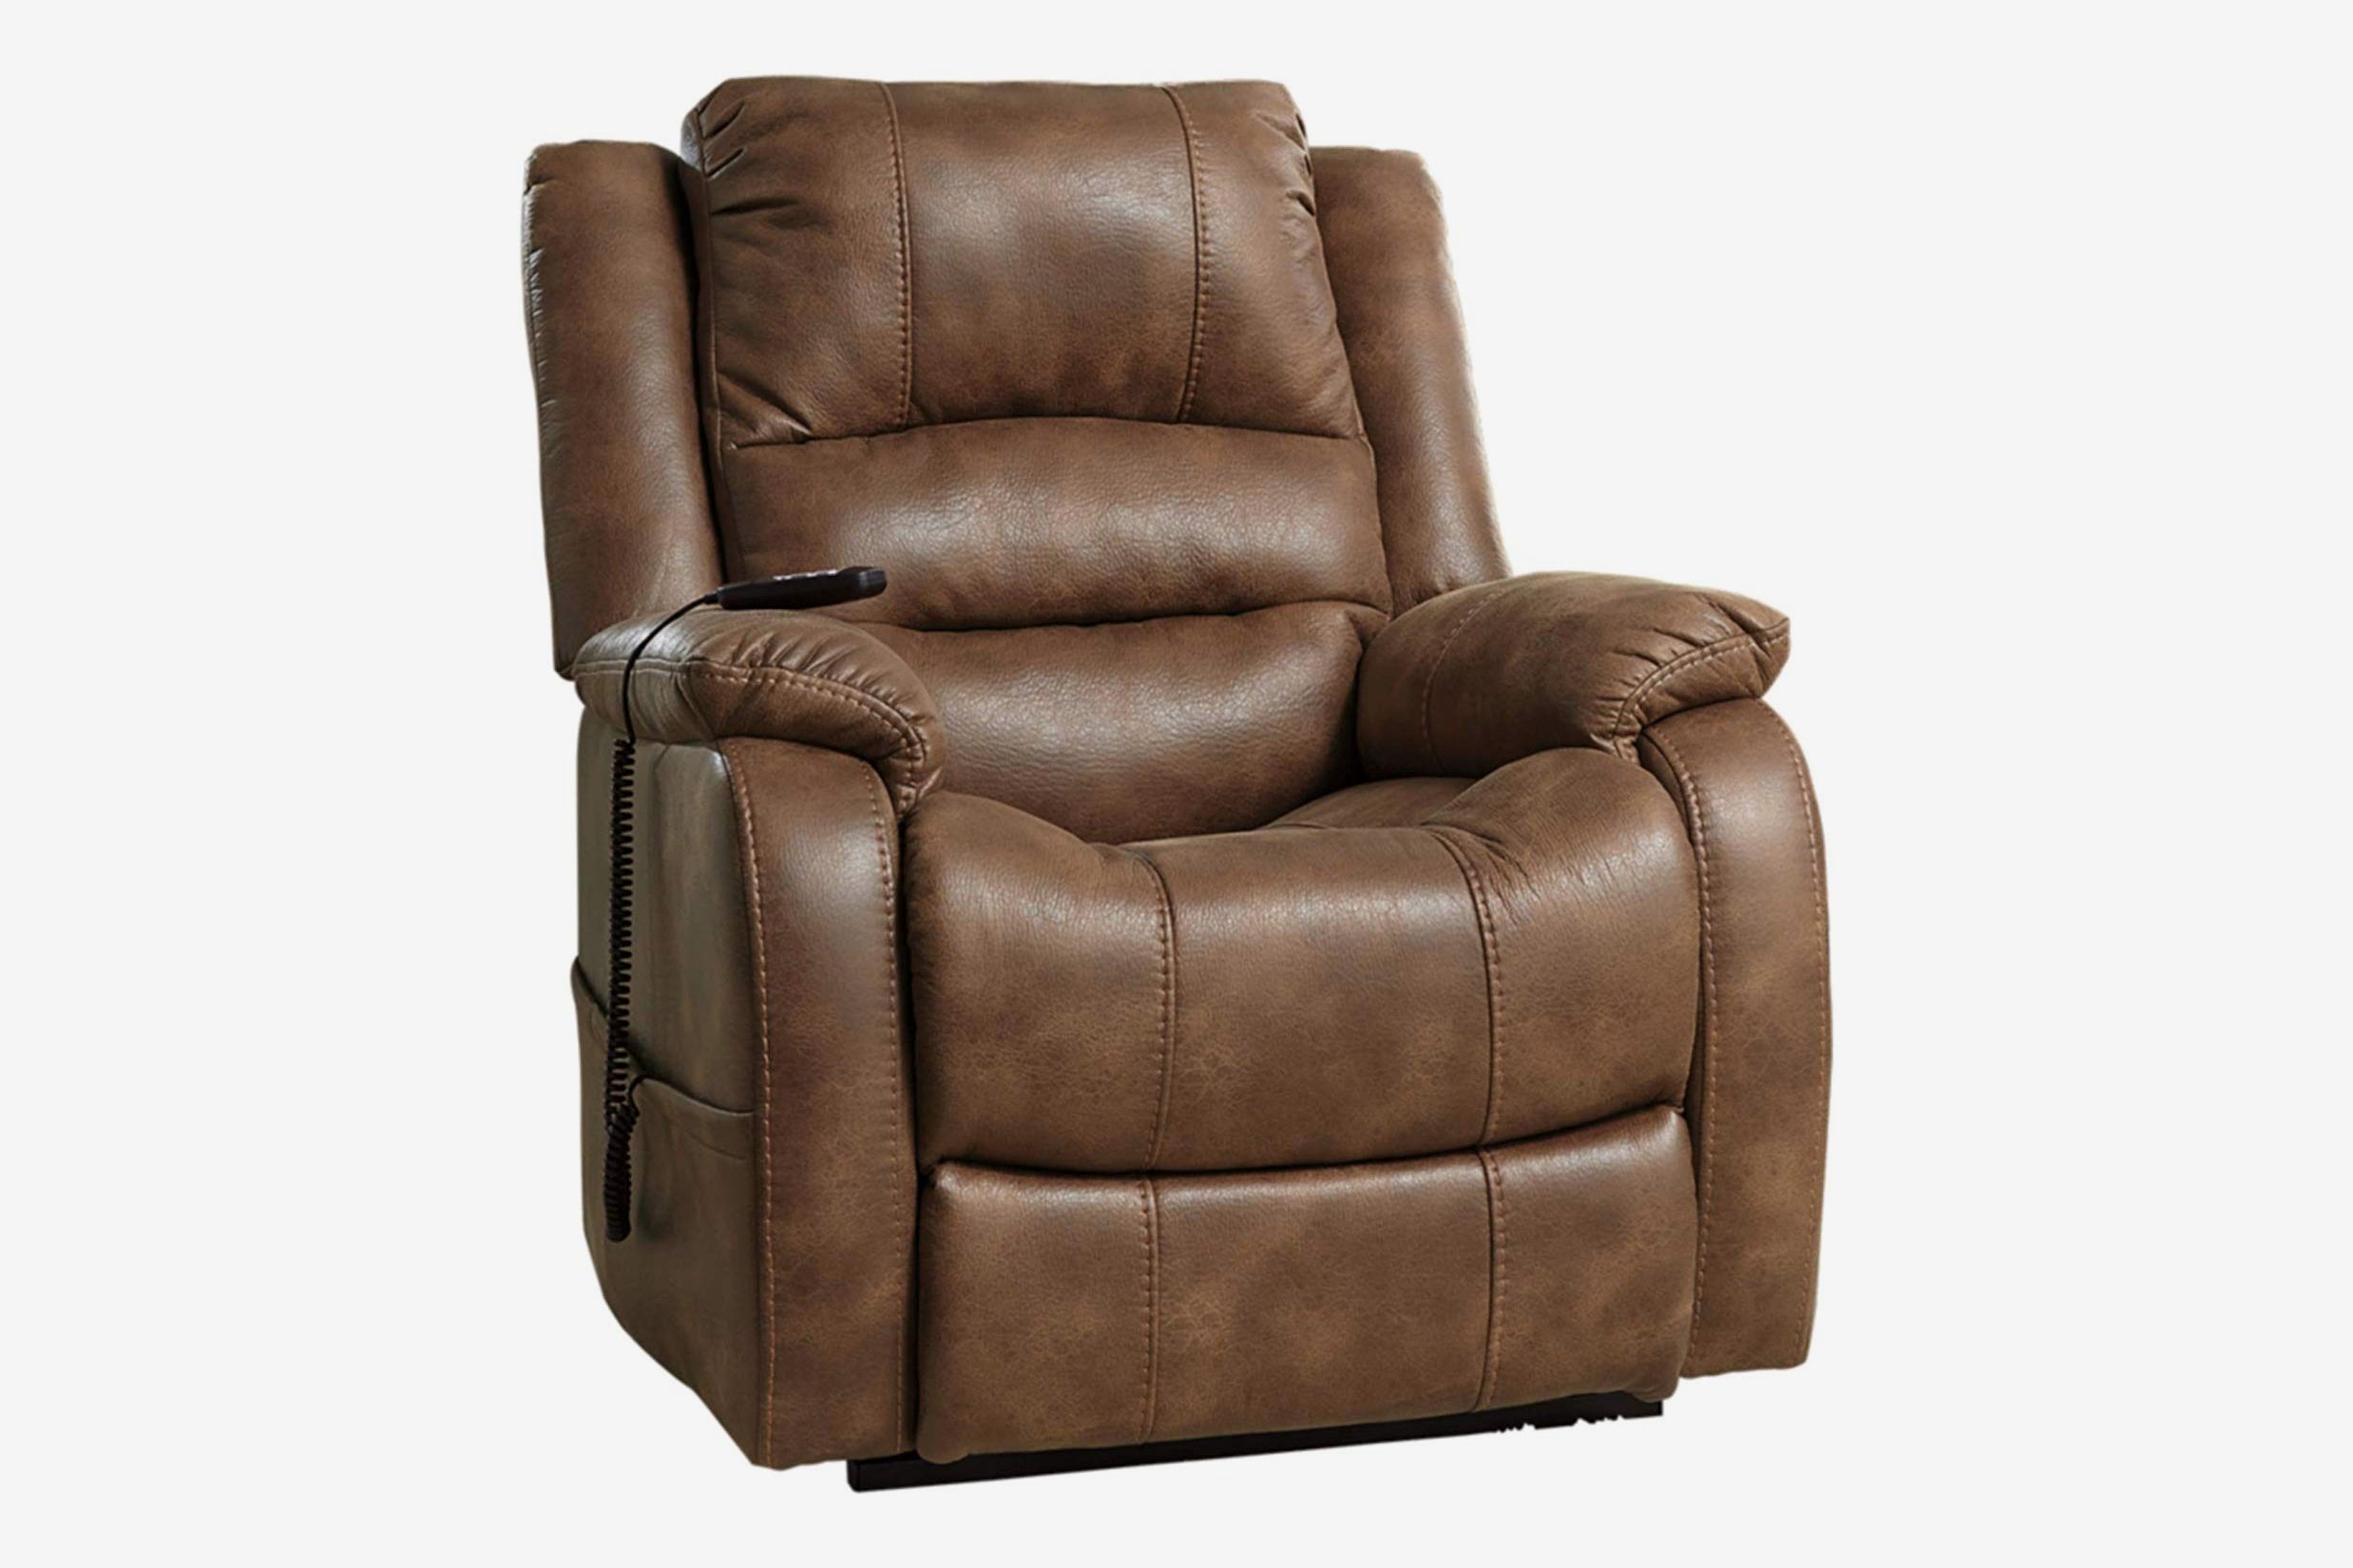 5 Best Leather Recliners 2019 The, Best Leather Sofa Recliner Reviews